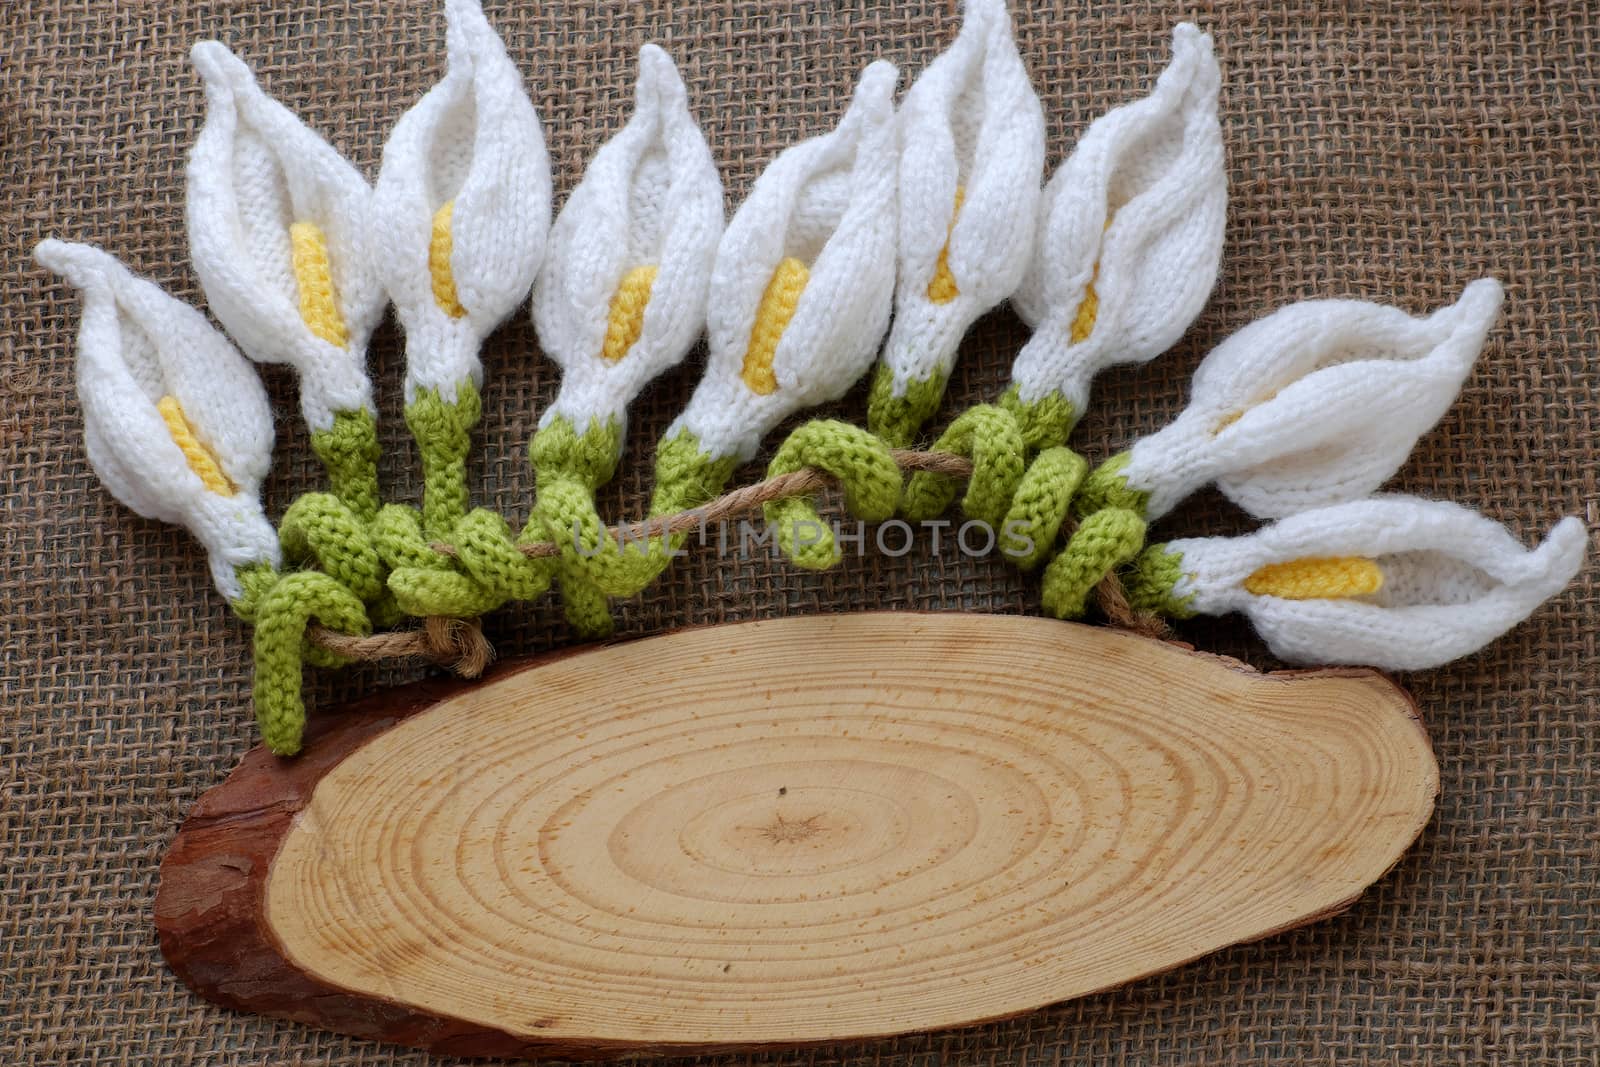 Amazing happy new year background from wood banner with nine of handmade white arum lily knit from yarn, diy home decor to make new year ornament in spring